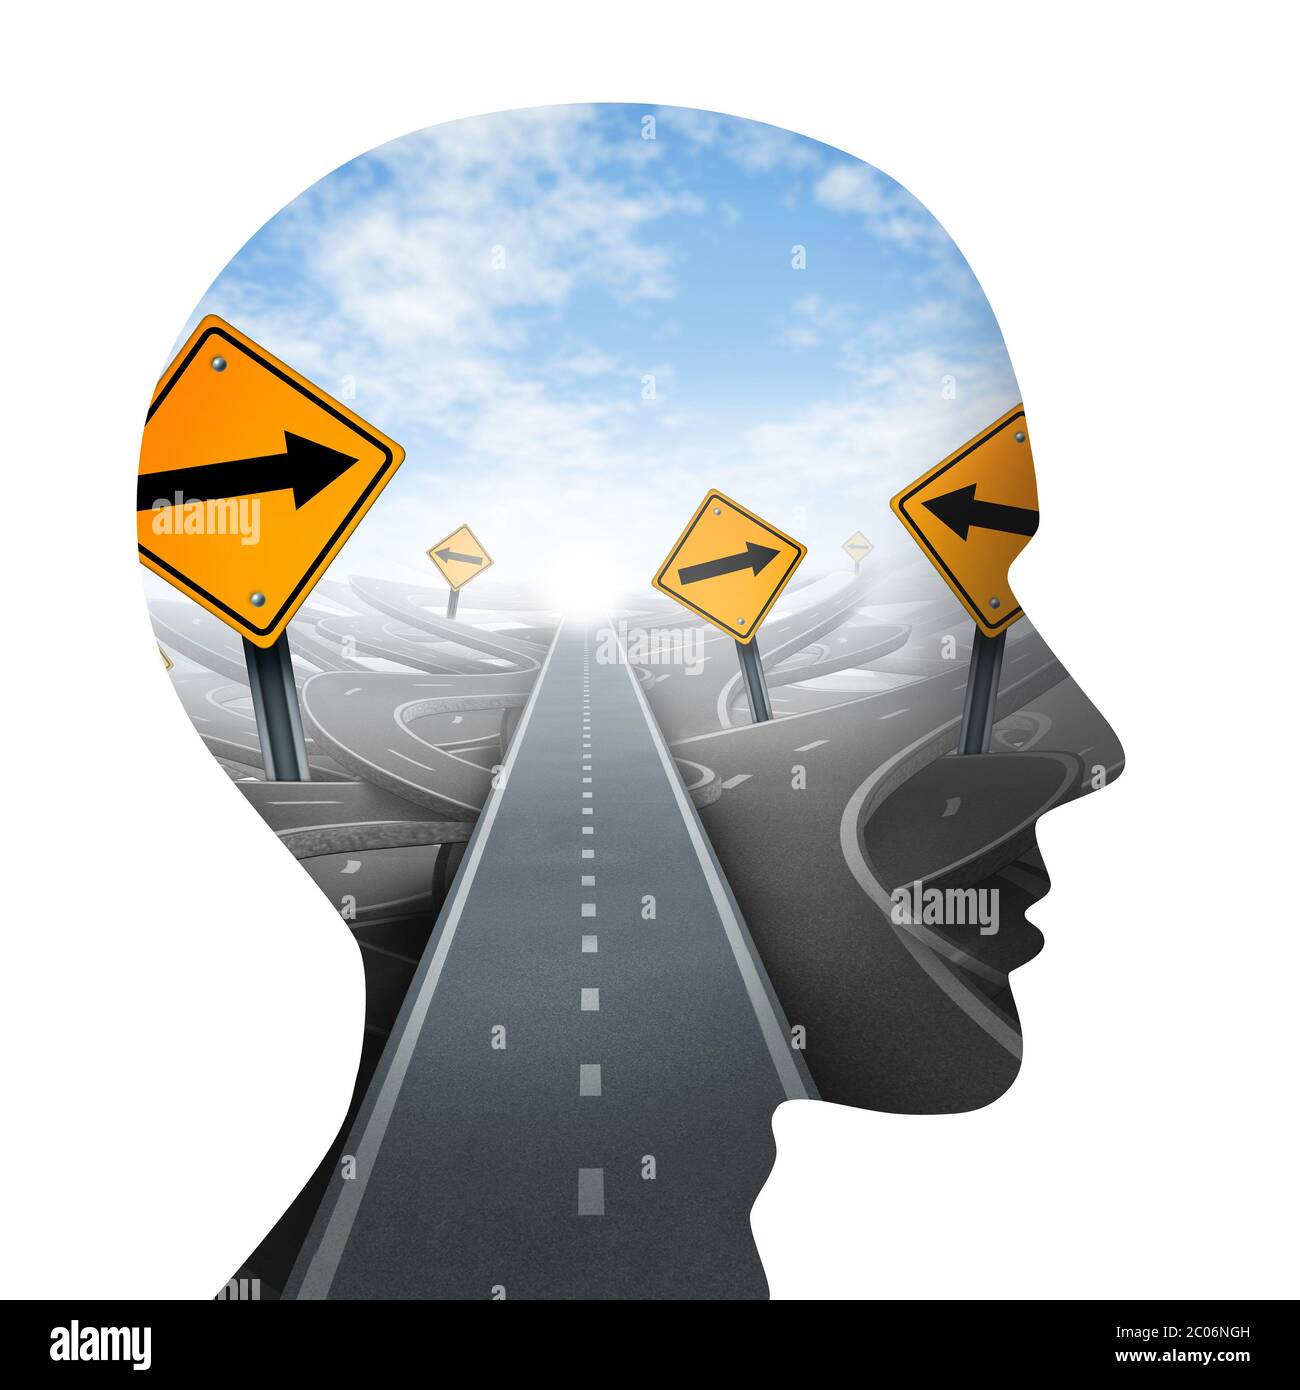 Think clearly concept and clear business thinking idea as a corporate success mindset or psychology symbol for mind focus and goal setting. Stock Photo